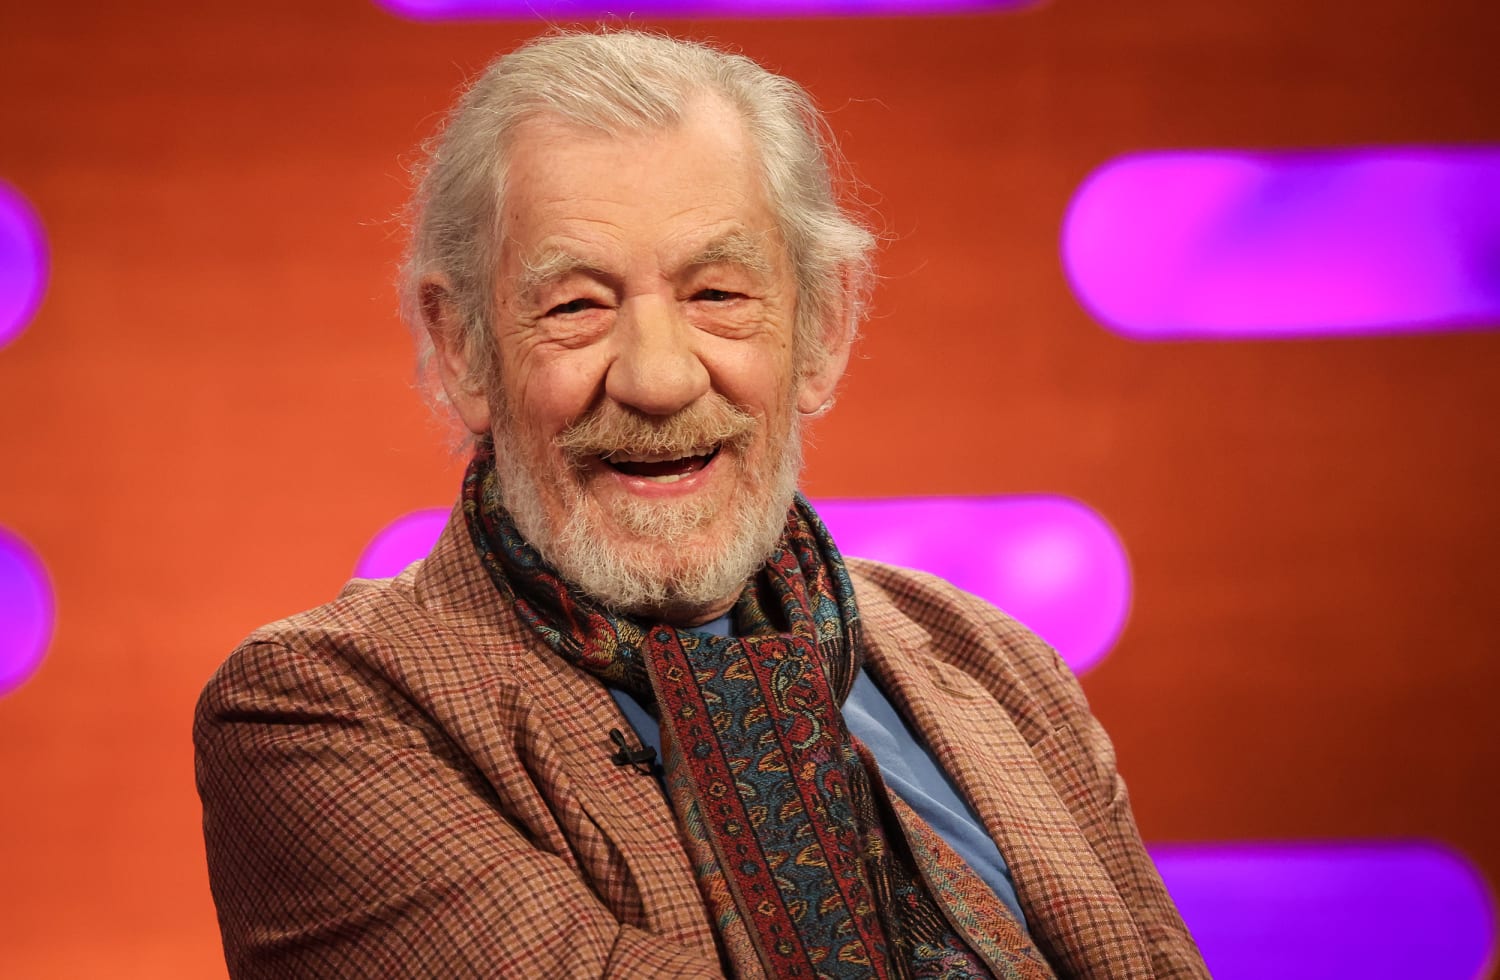 Ian McKellen was taken to hospital after collapsing while performing in London